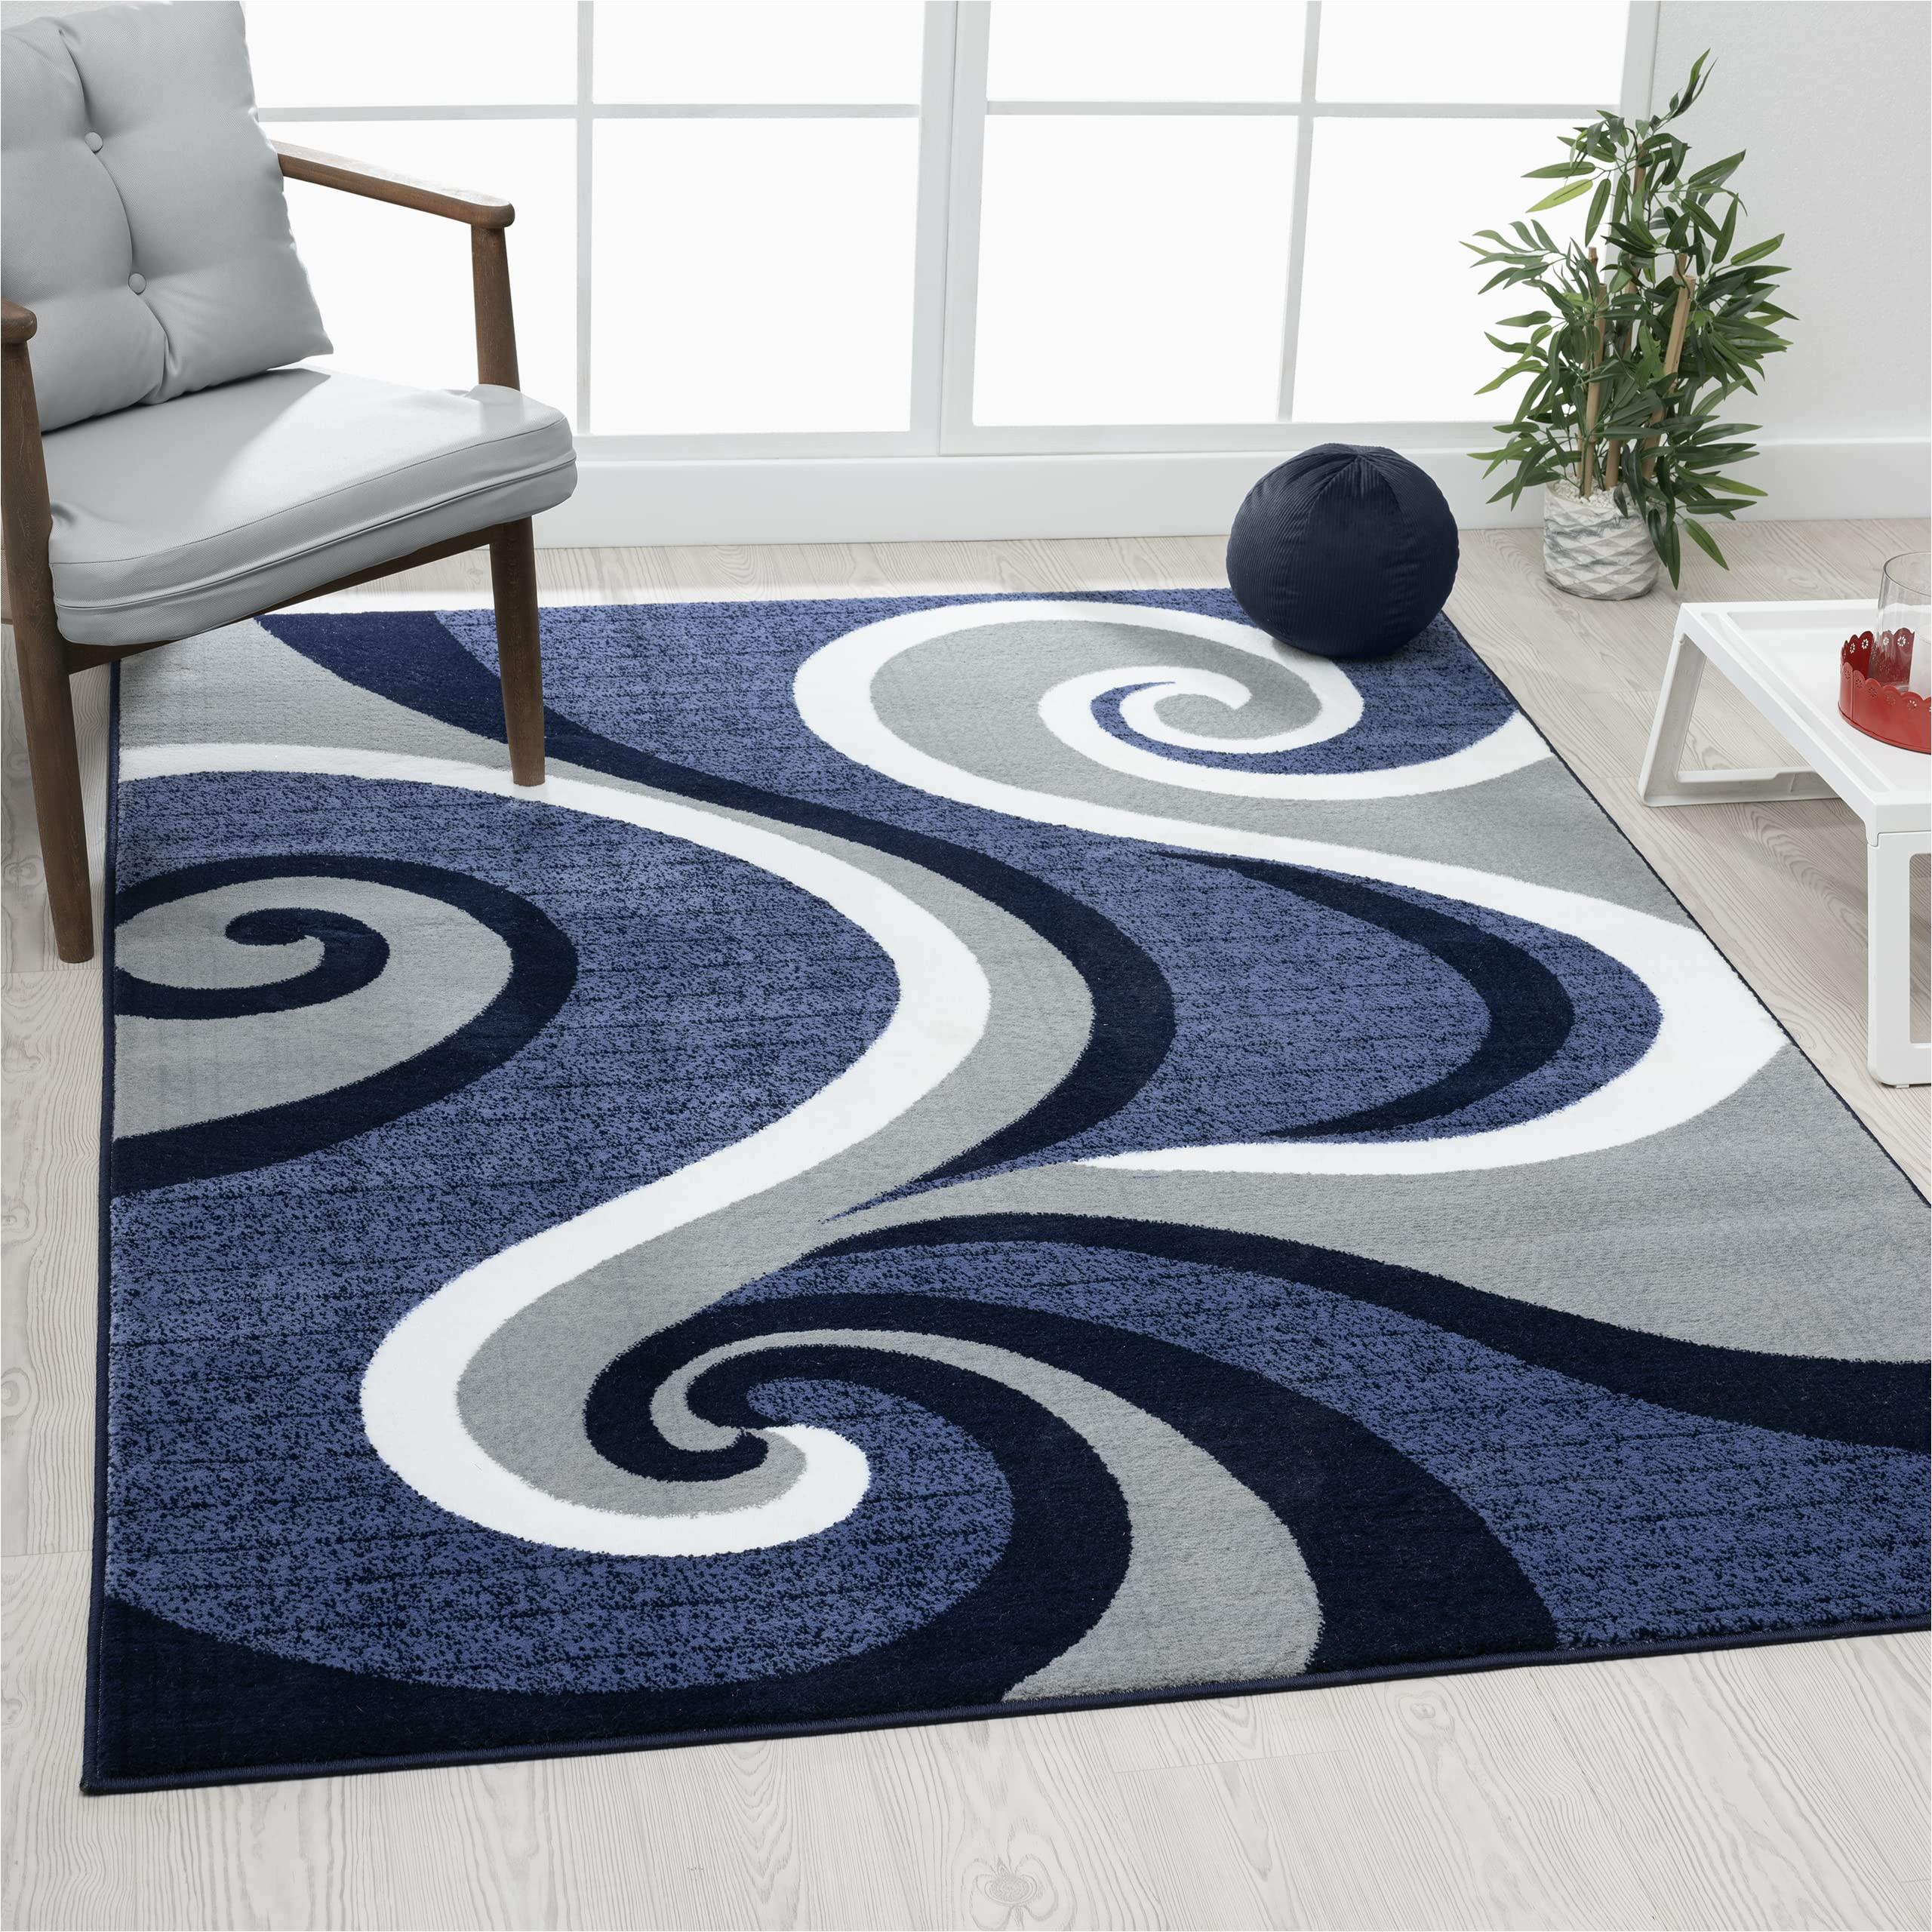 Amazon Blue area Rugs 0327 Blue White Gray 5 X 7 area Rug Abstract Carpet by Persian-rugs